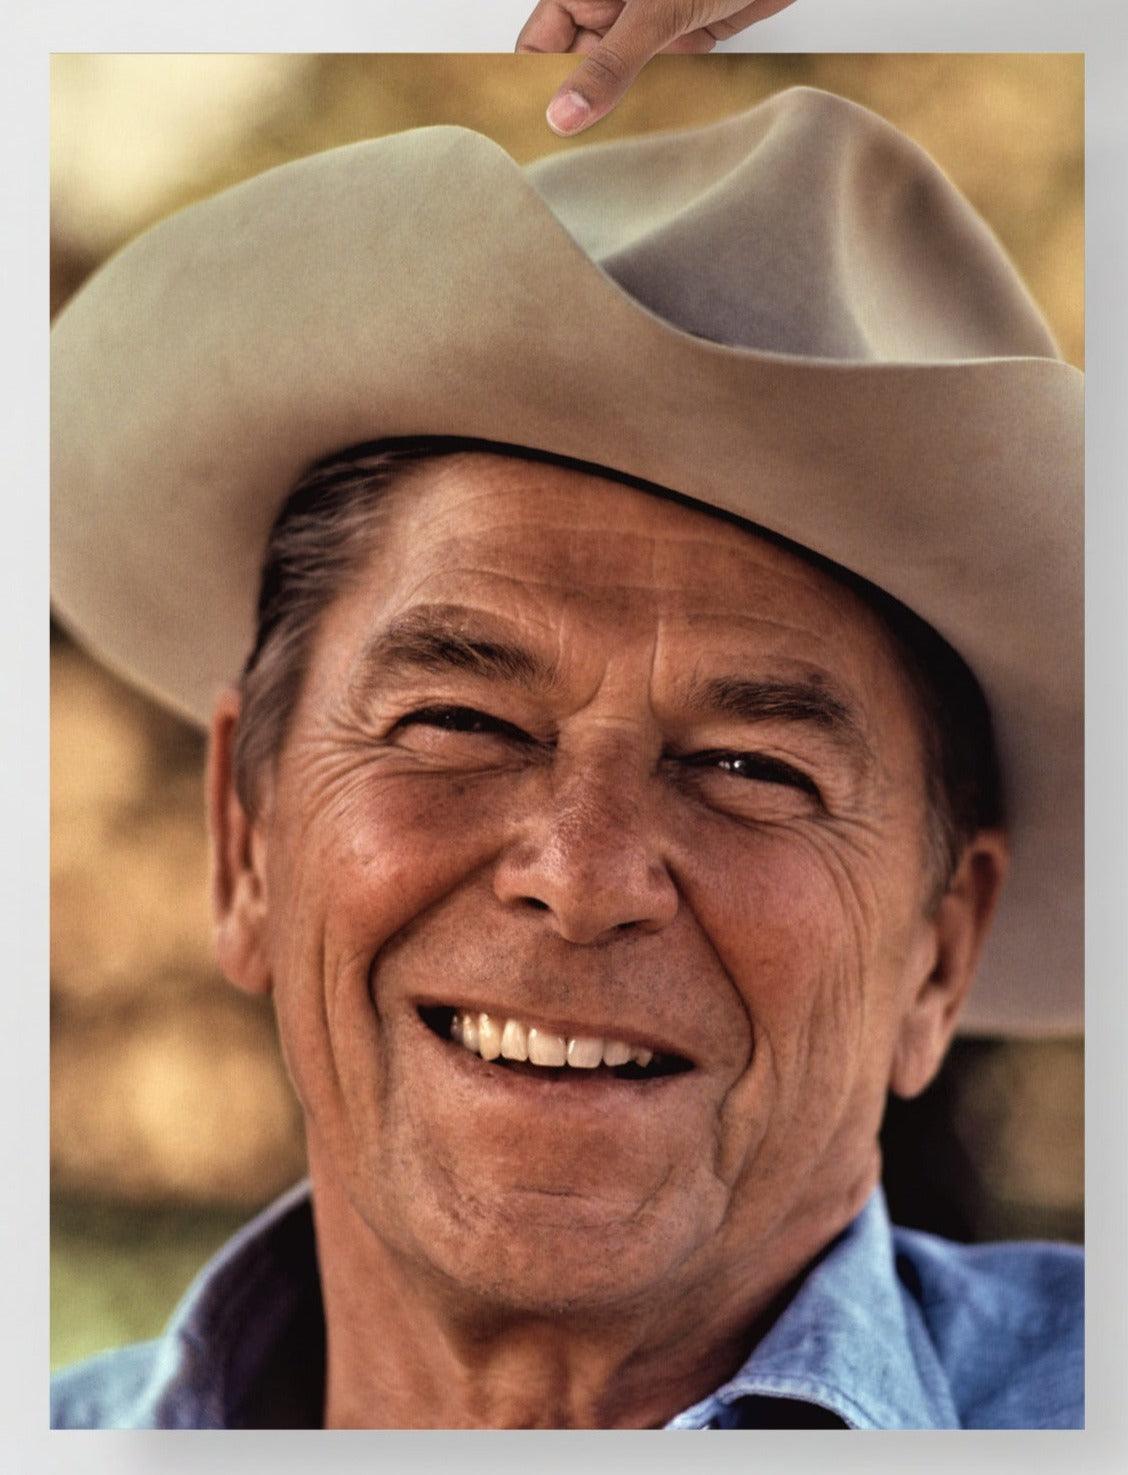 A Ronald Reagan Cowboy Hat poster on a plain backdrop in size 18x24”.